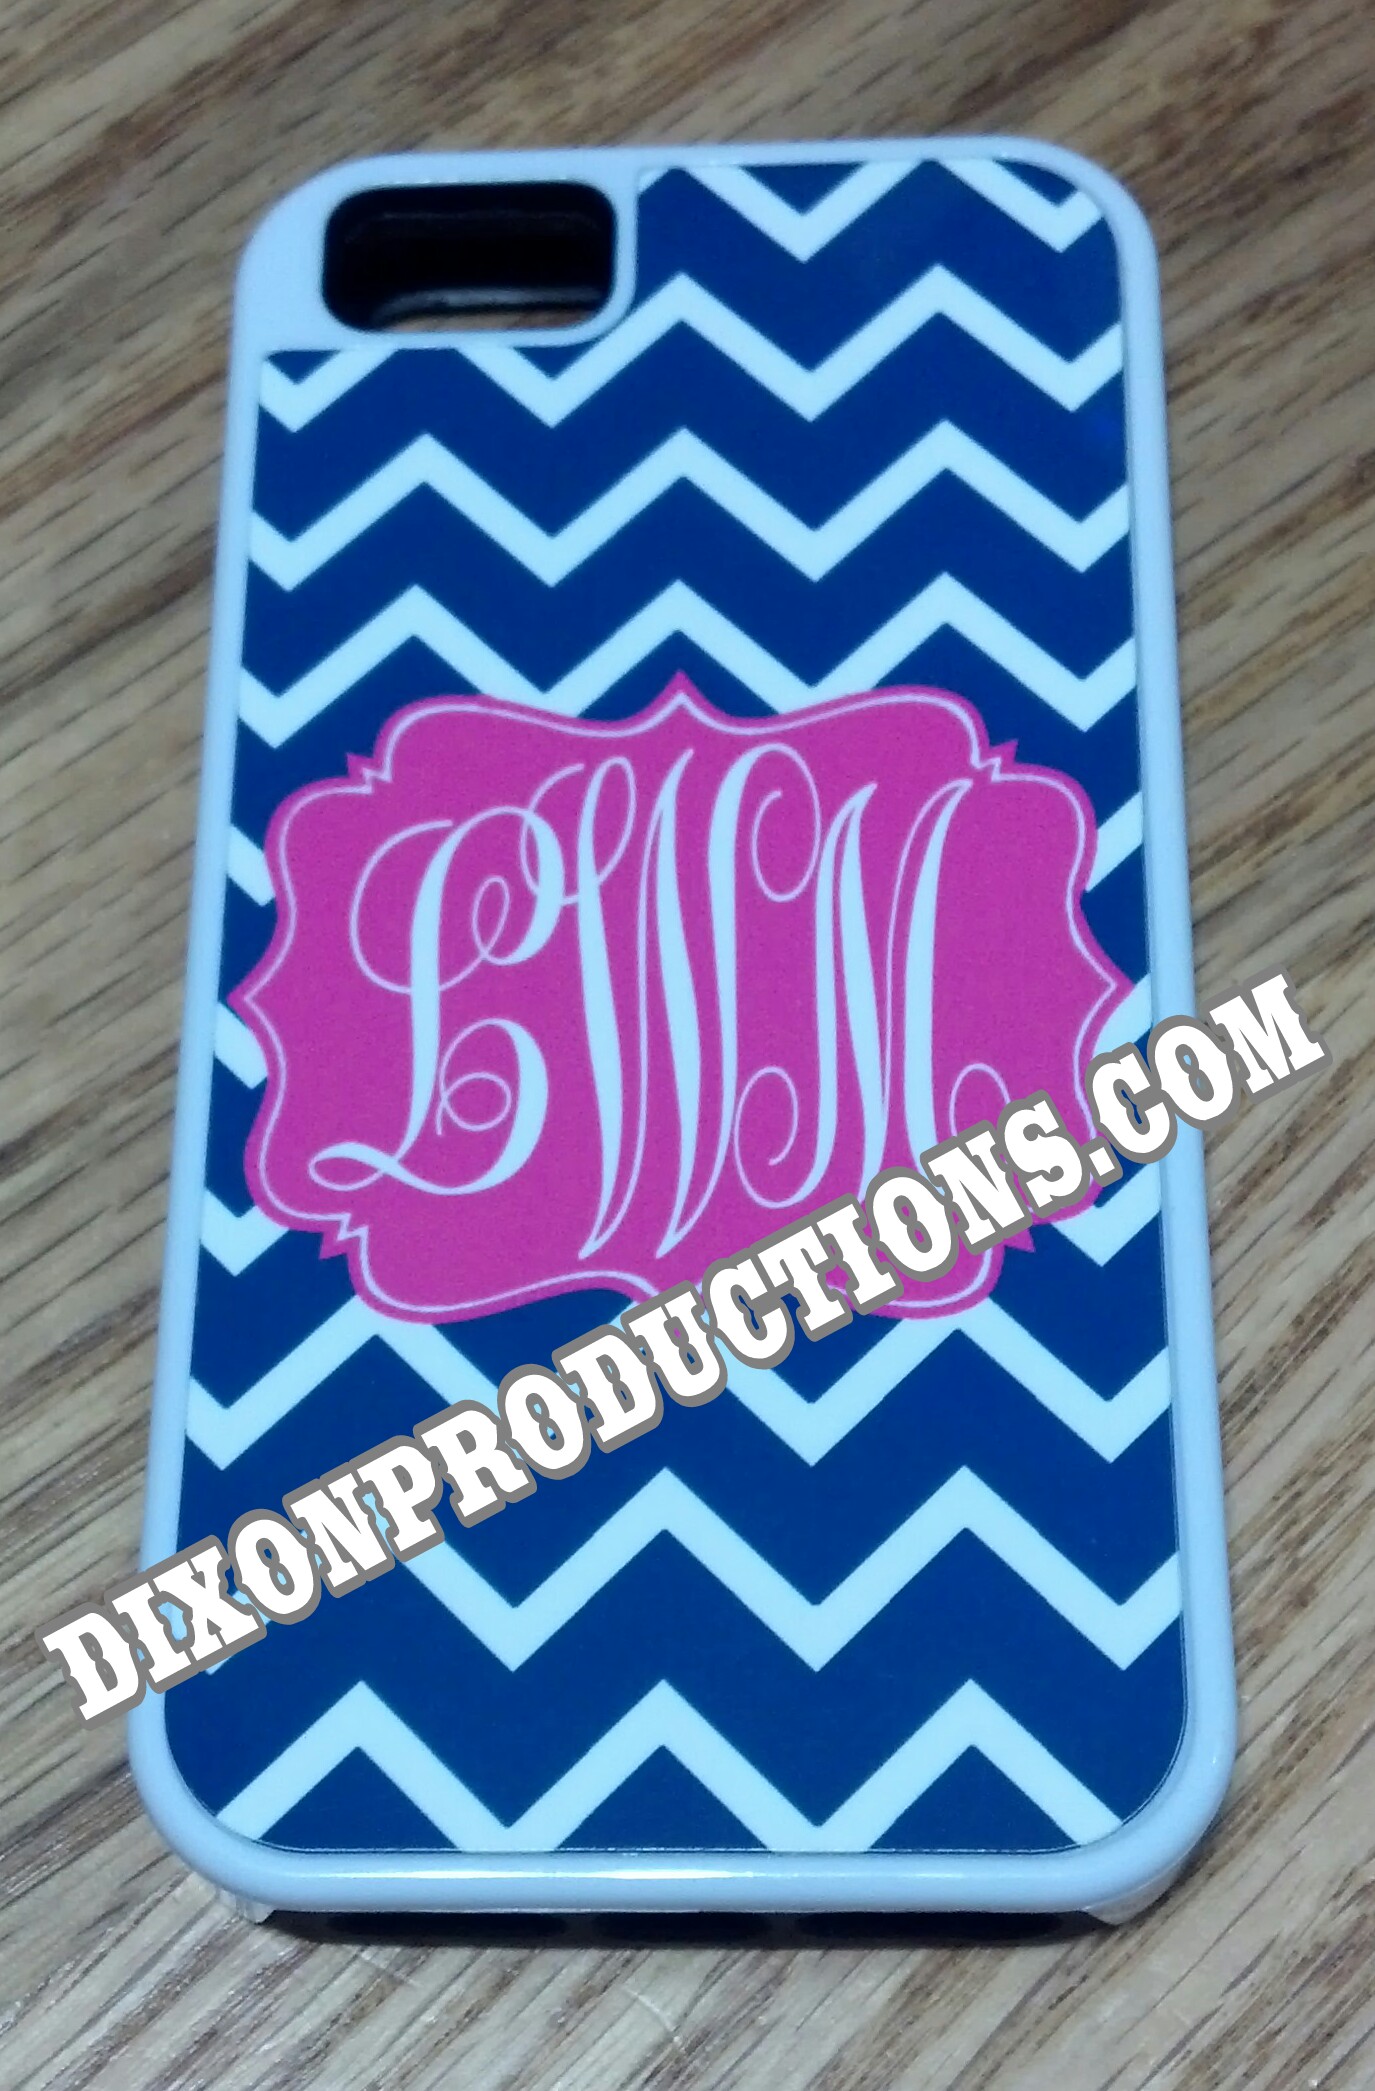 DIXON PRODUCTIONS made with sublimation printing